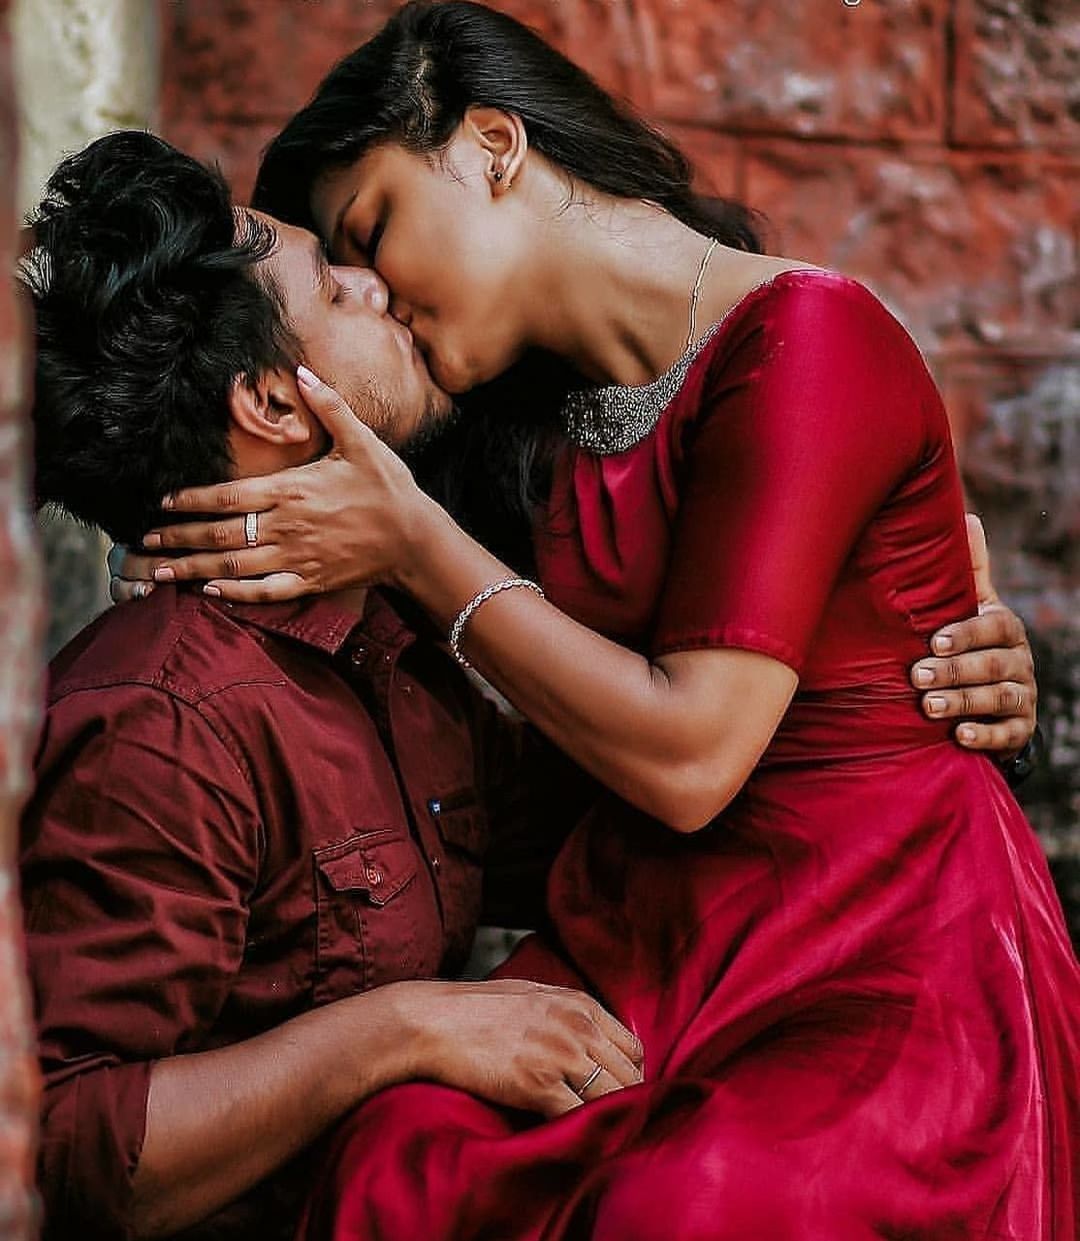 women, adult, love, emotion, two people, togetherness, positive emotion, romance, embracing, female, red, men, kissing, young adult, affectionate, person, ceremony, happiness, smiling, bonding, clothing, passion, photo shoot, eyes closed, brick, sitting, portrait, child, lifestyles